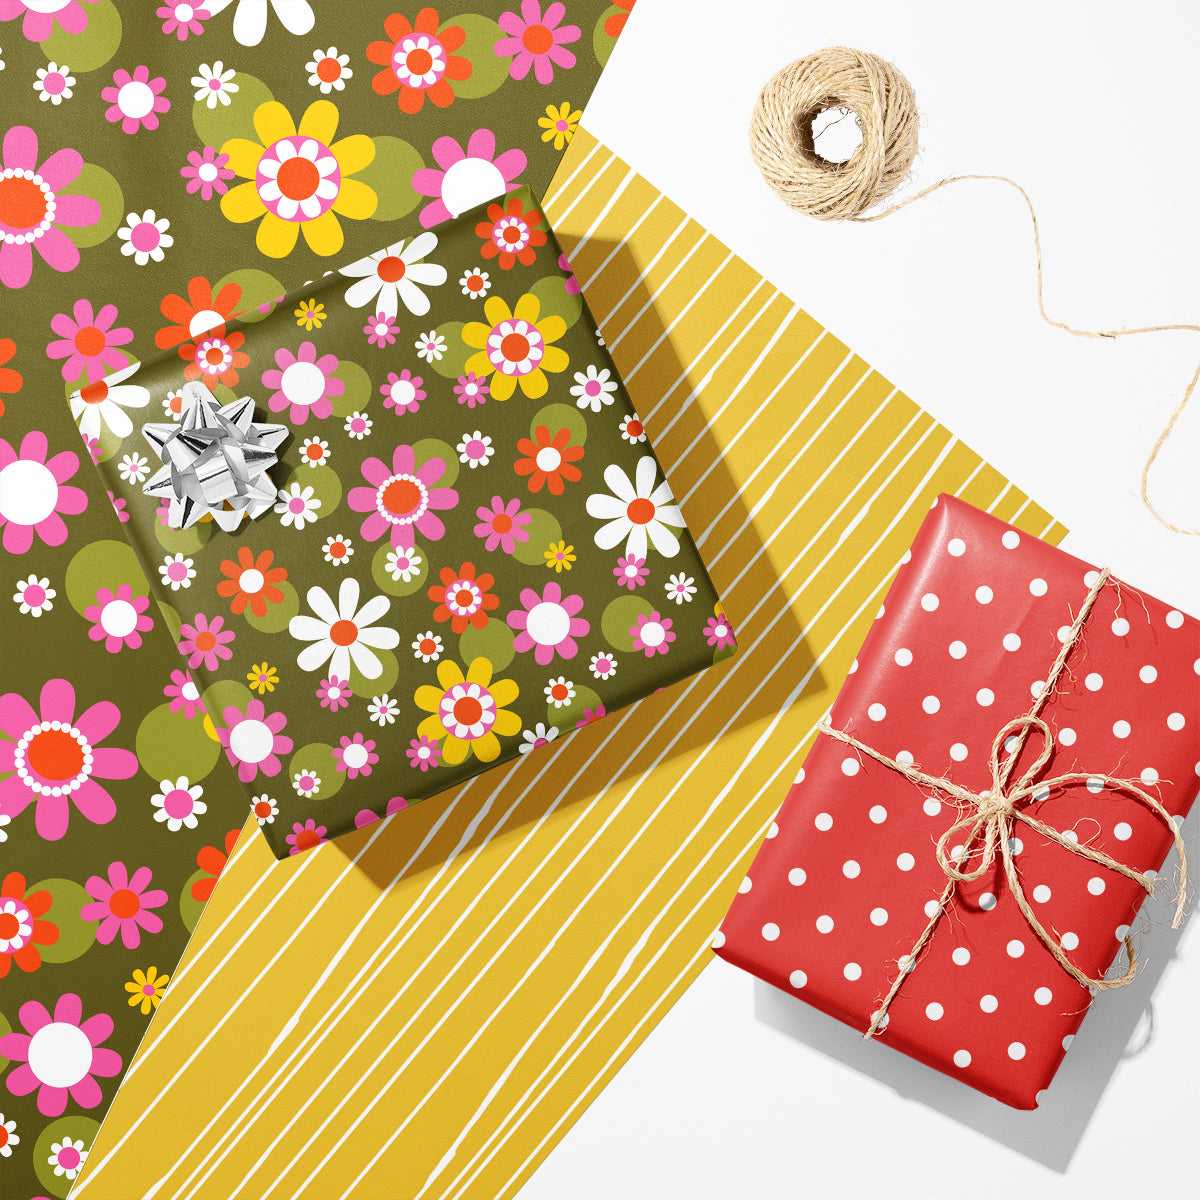 Cherry Blossoms Gift Wrapping Papers: 12 Sheets of 18 x 24 inch Wrappi –  Q.E.D. Astoria